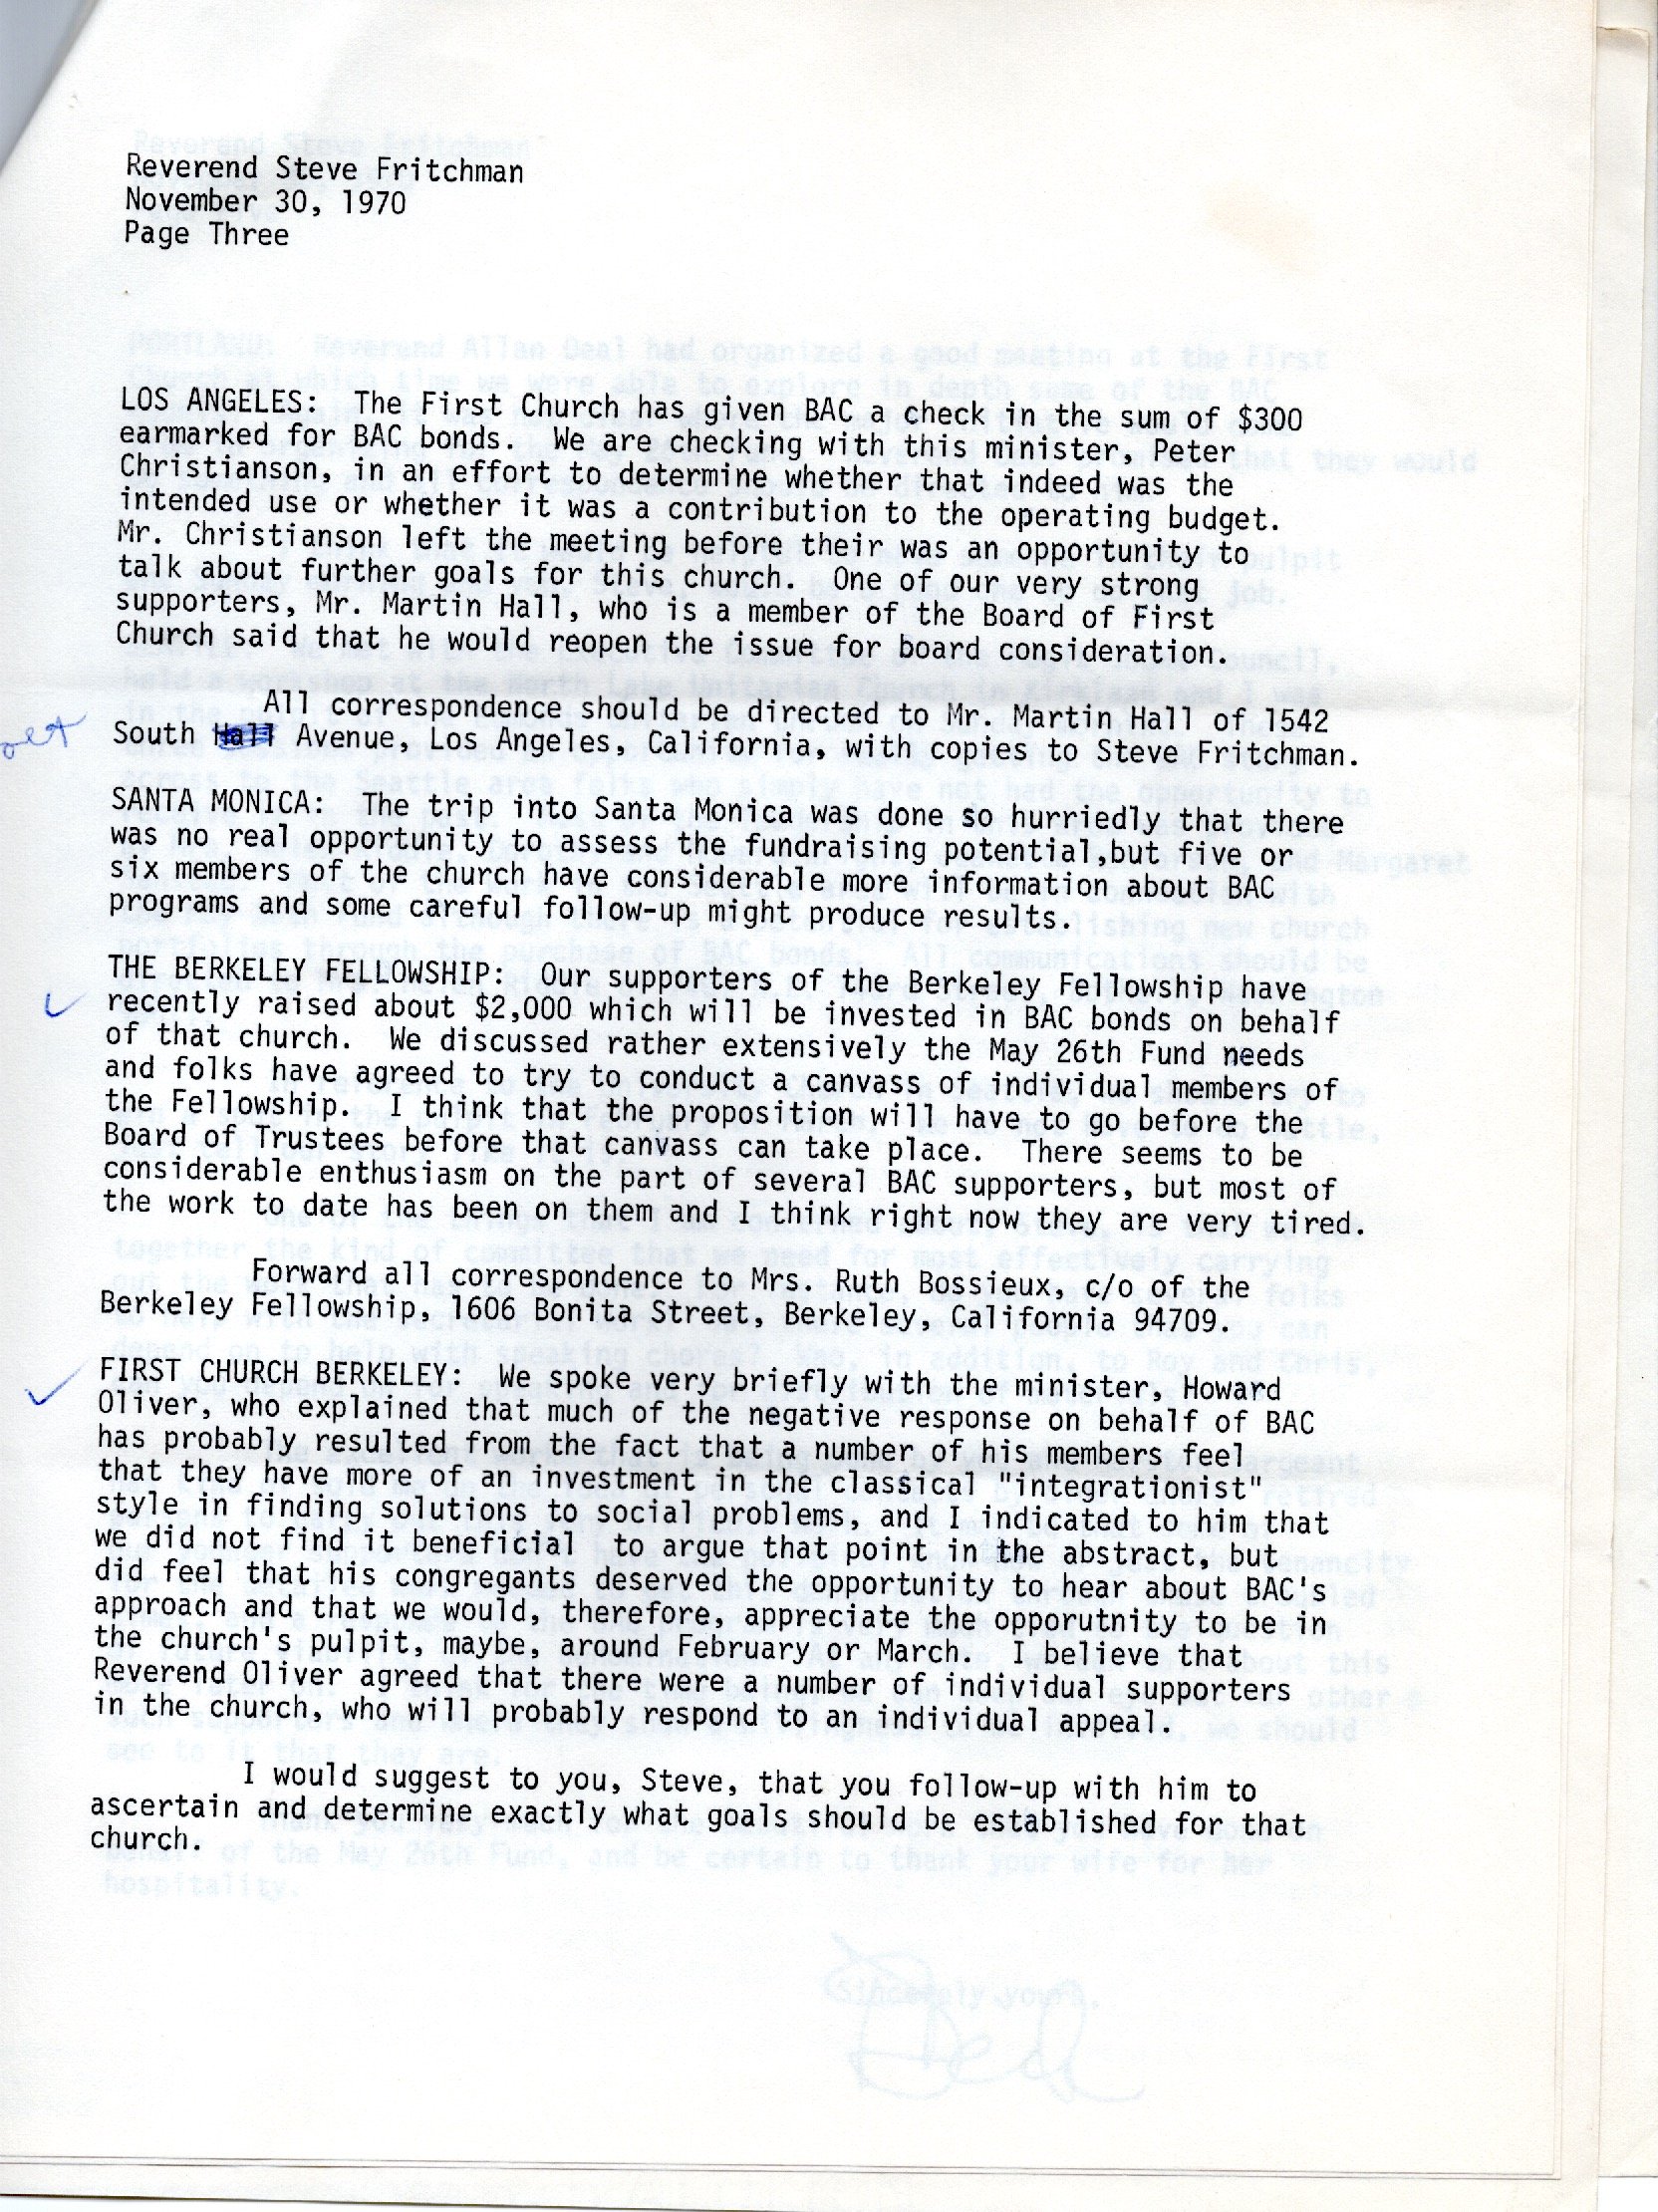 1970.11.30 memo from Dick Traylor to Fritchman_0003.jpg